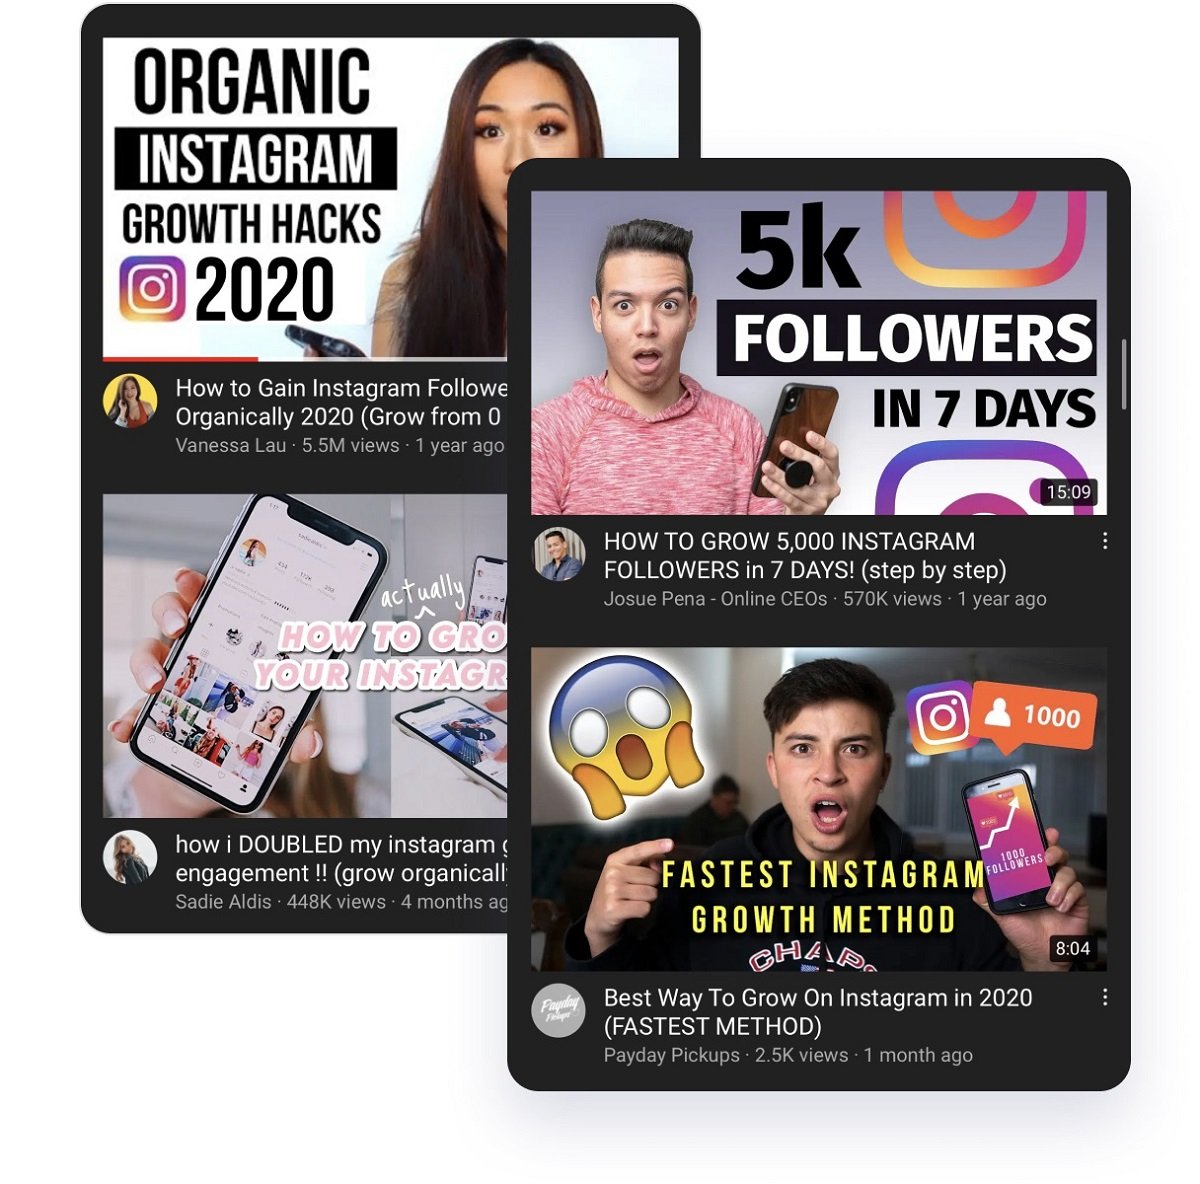 1M followers in 12 months on Instagram - with just a calendar | Inflact